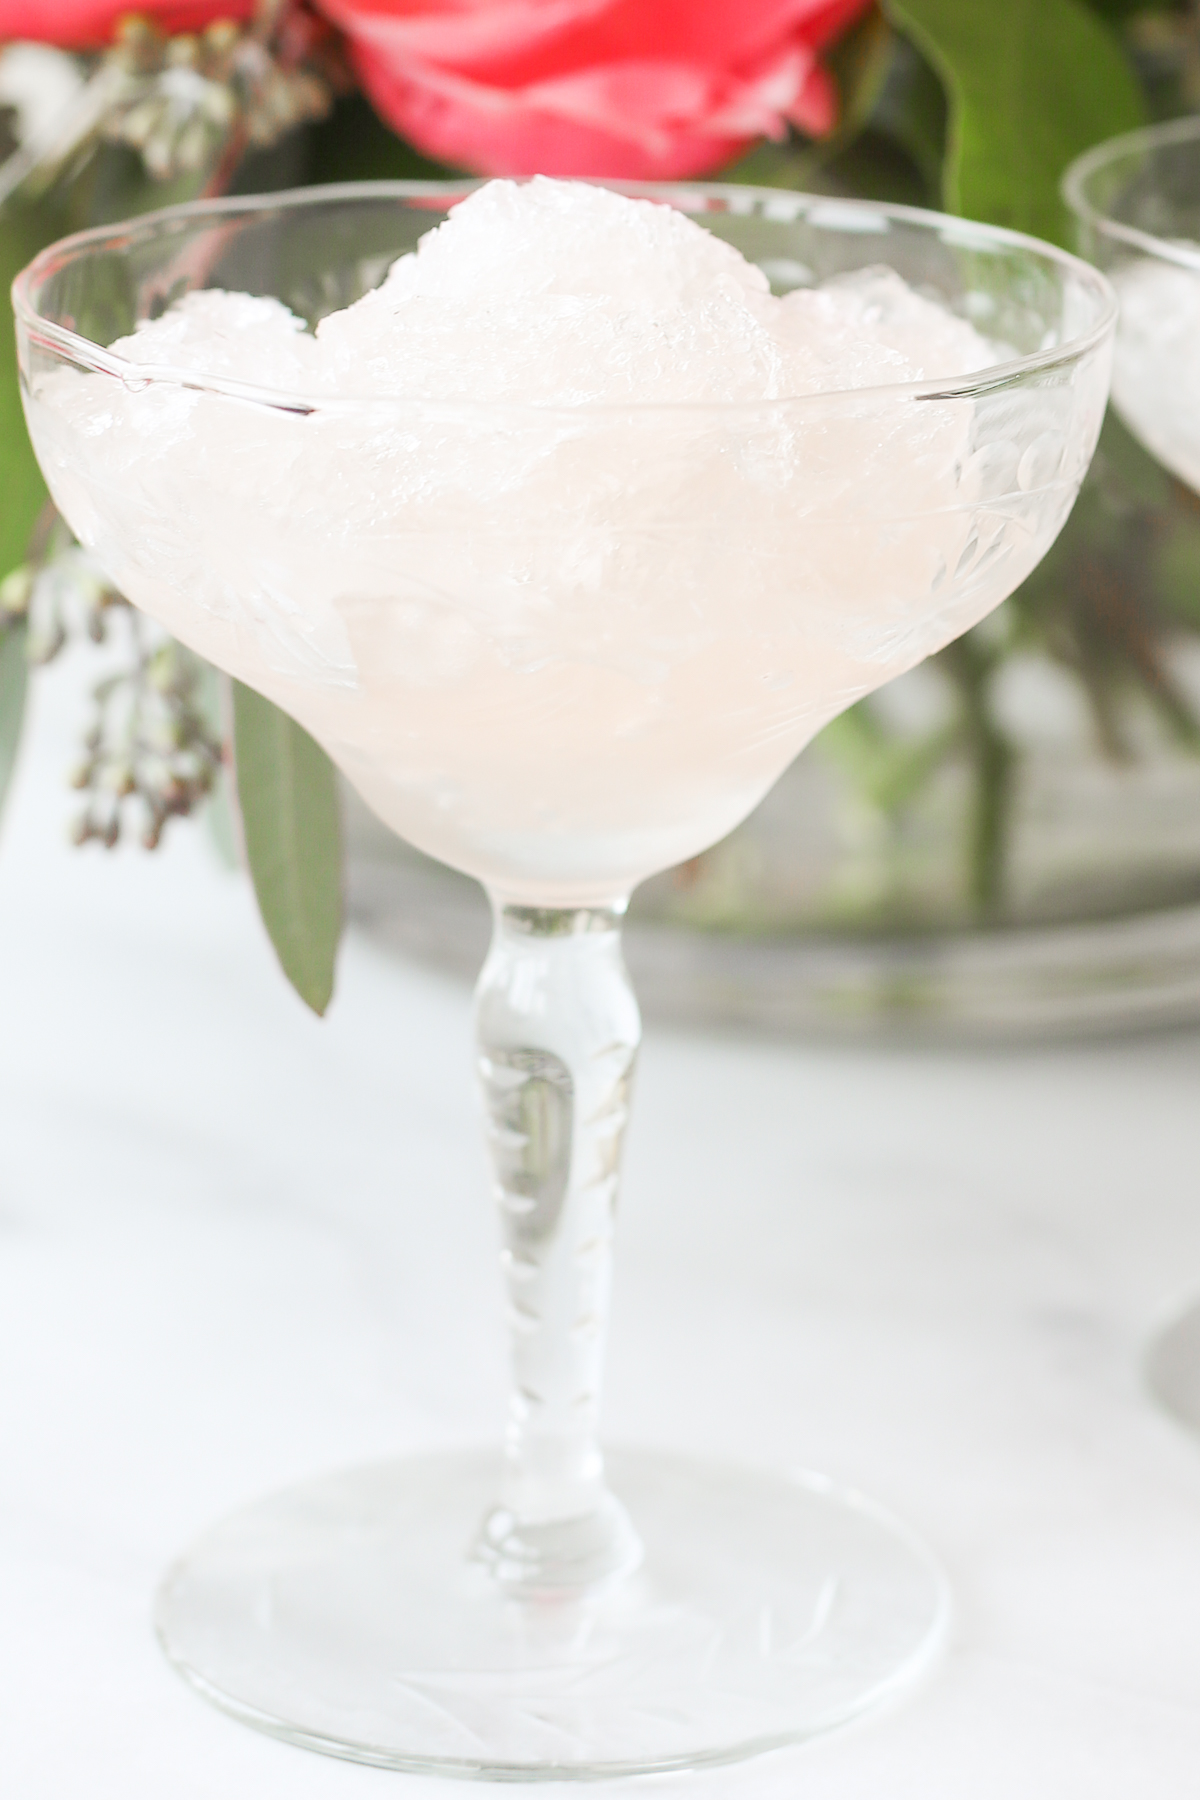 Two martini glasses filled with refreshing frosé, garnished with ice.